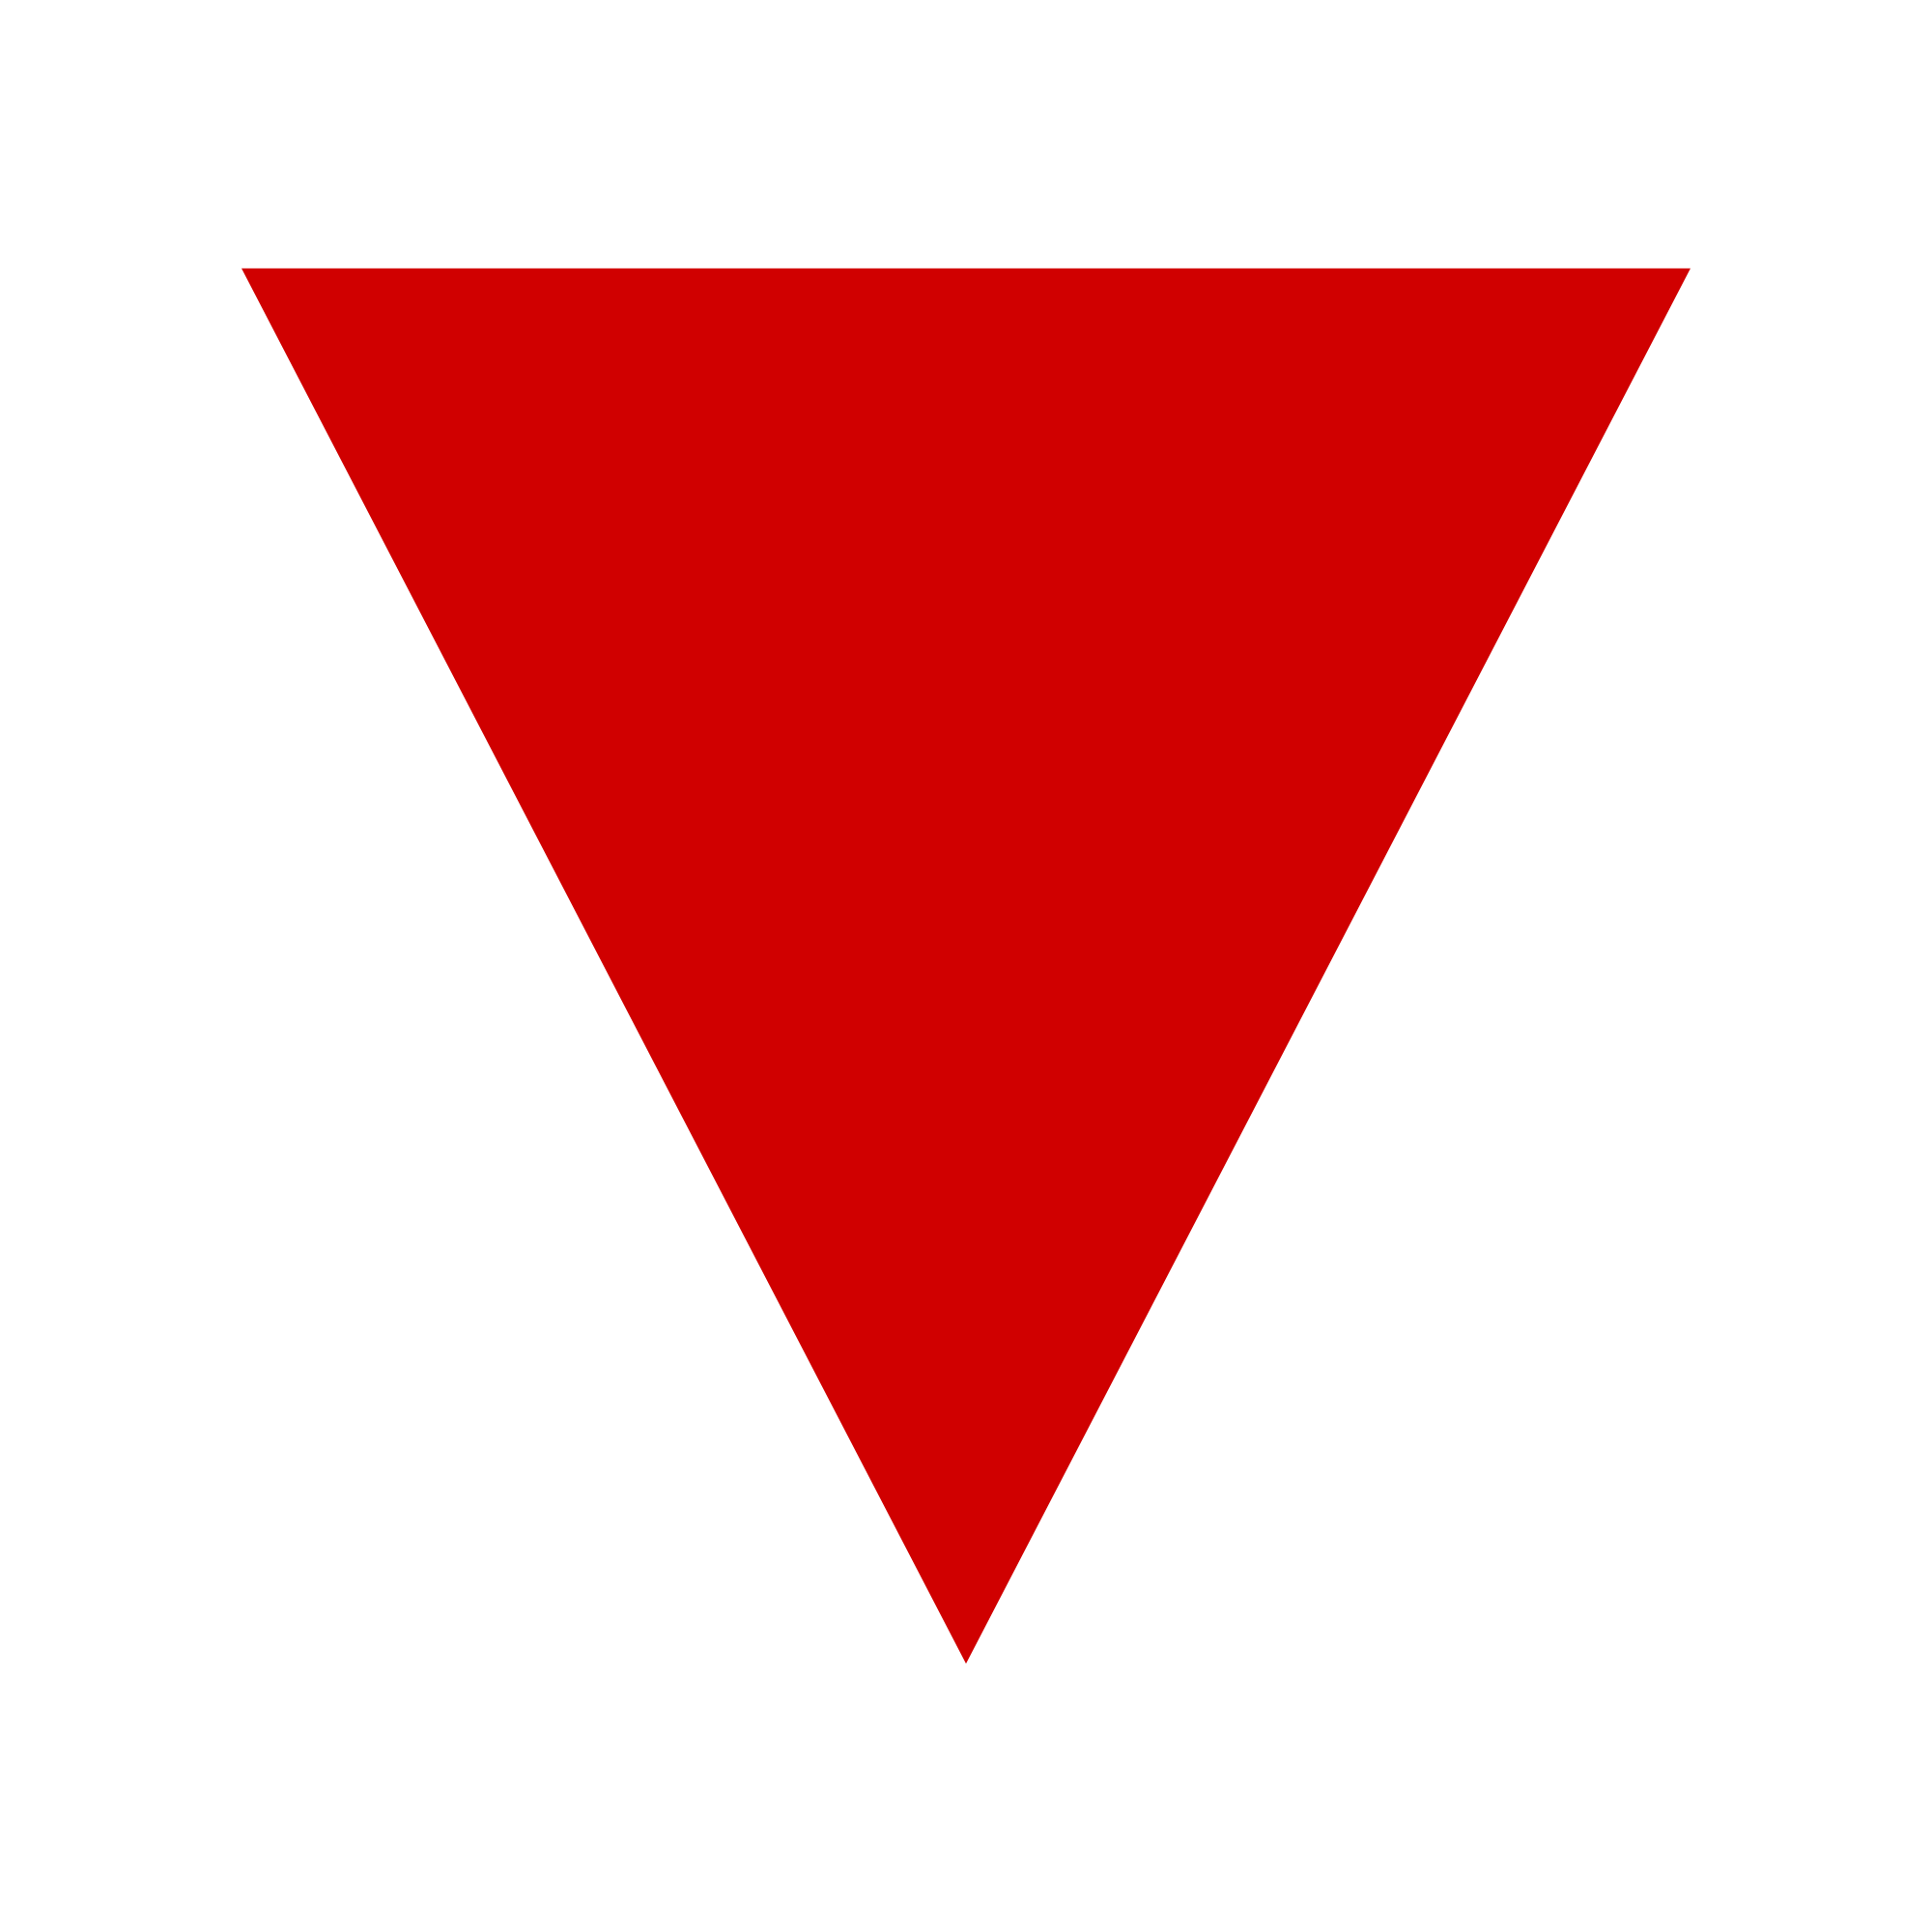 Red Triangle White Line Logo - File:White red triangle turned.svg - Wikimedia Commons